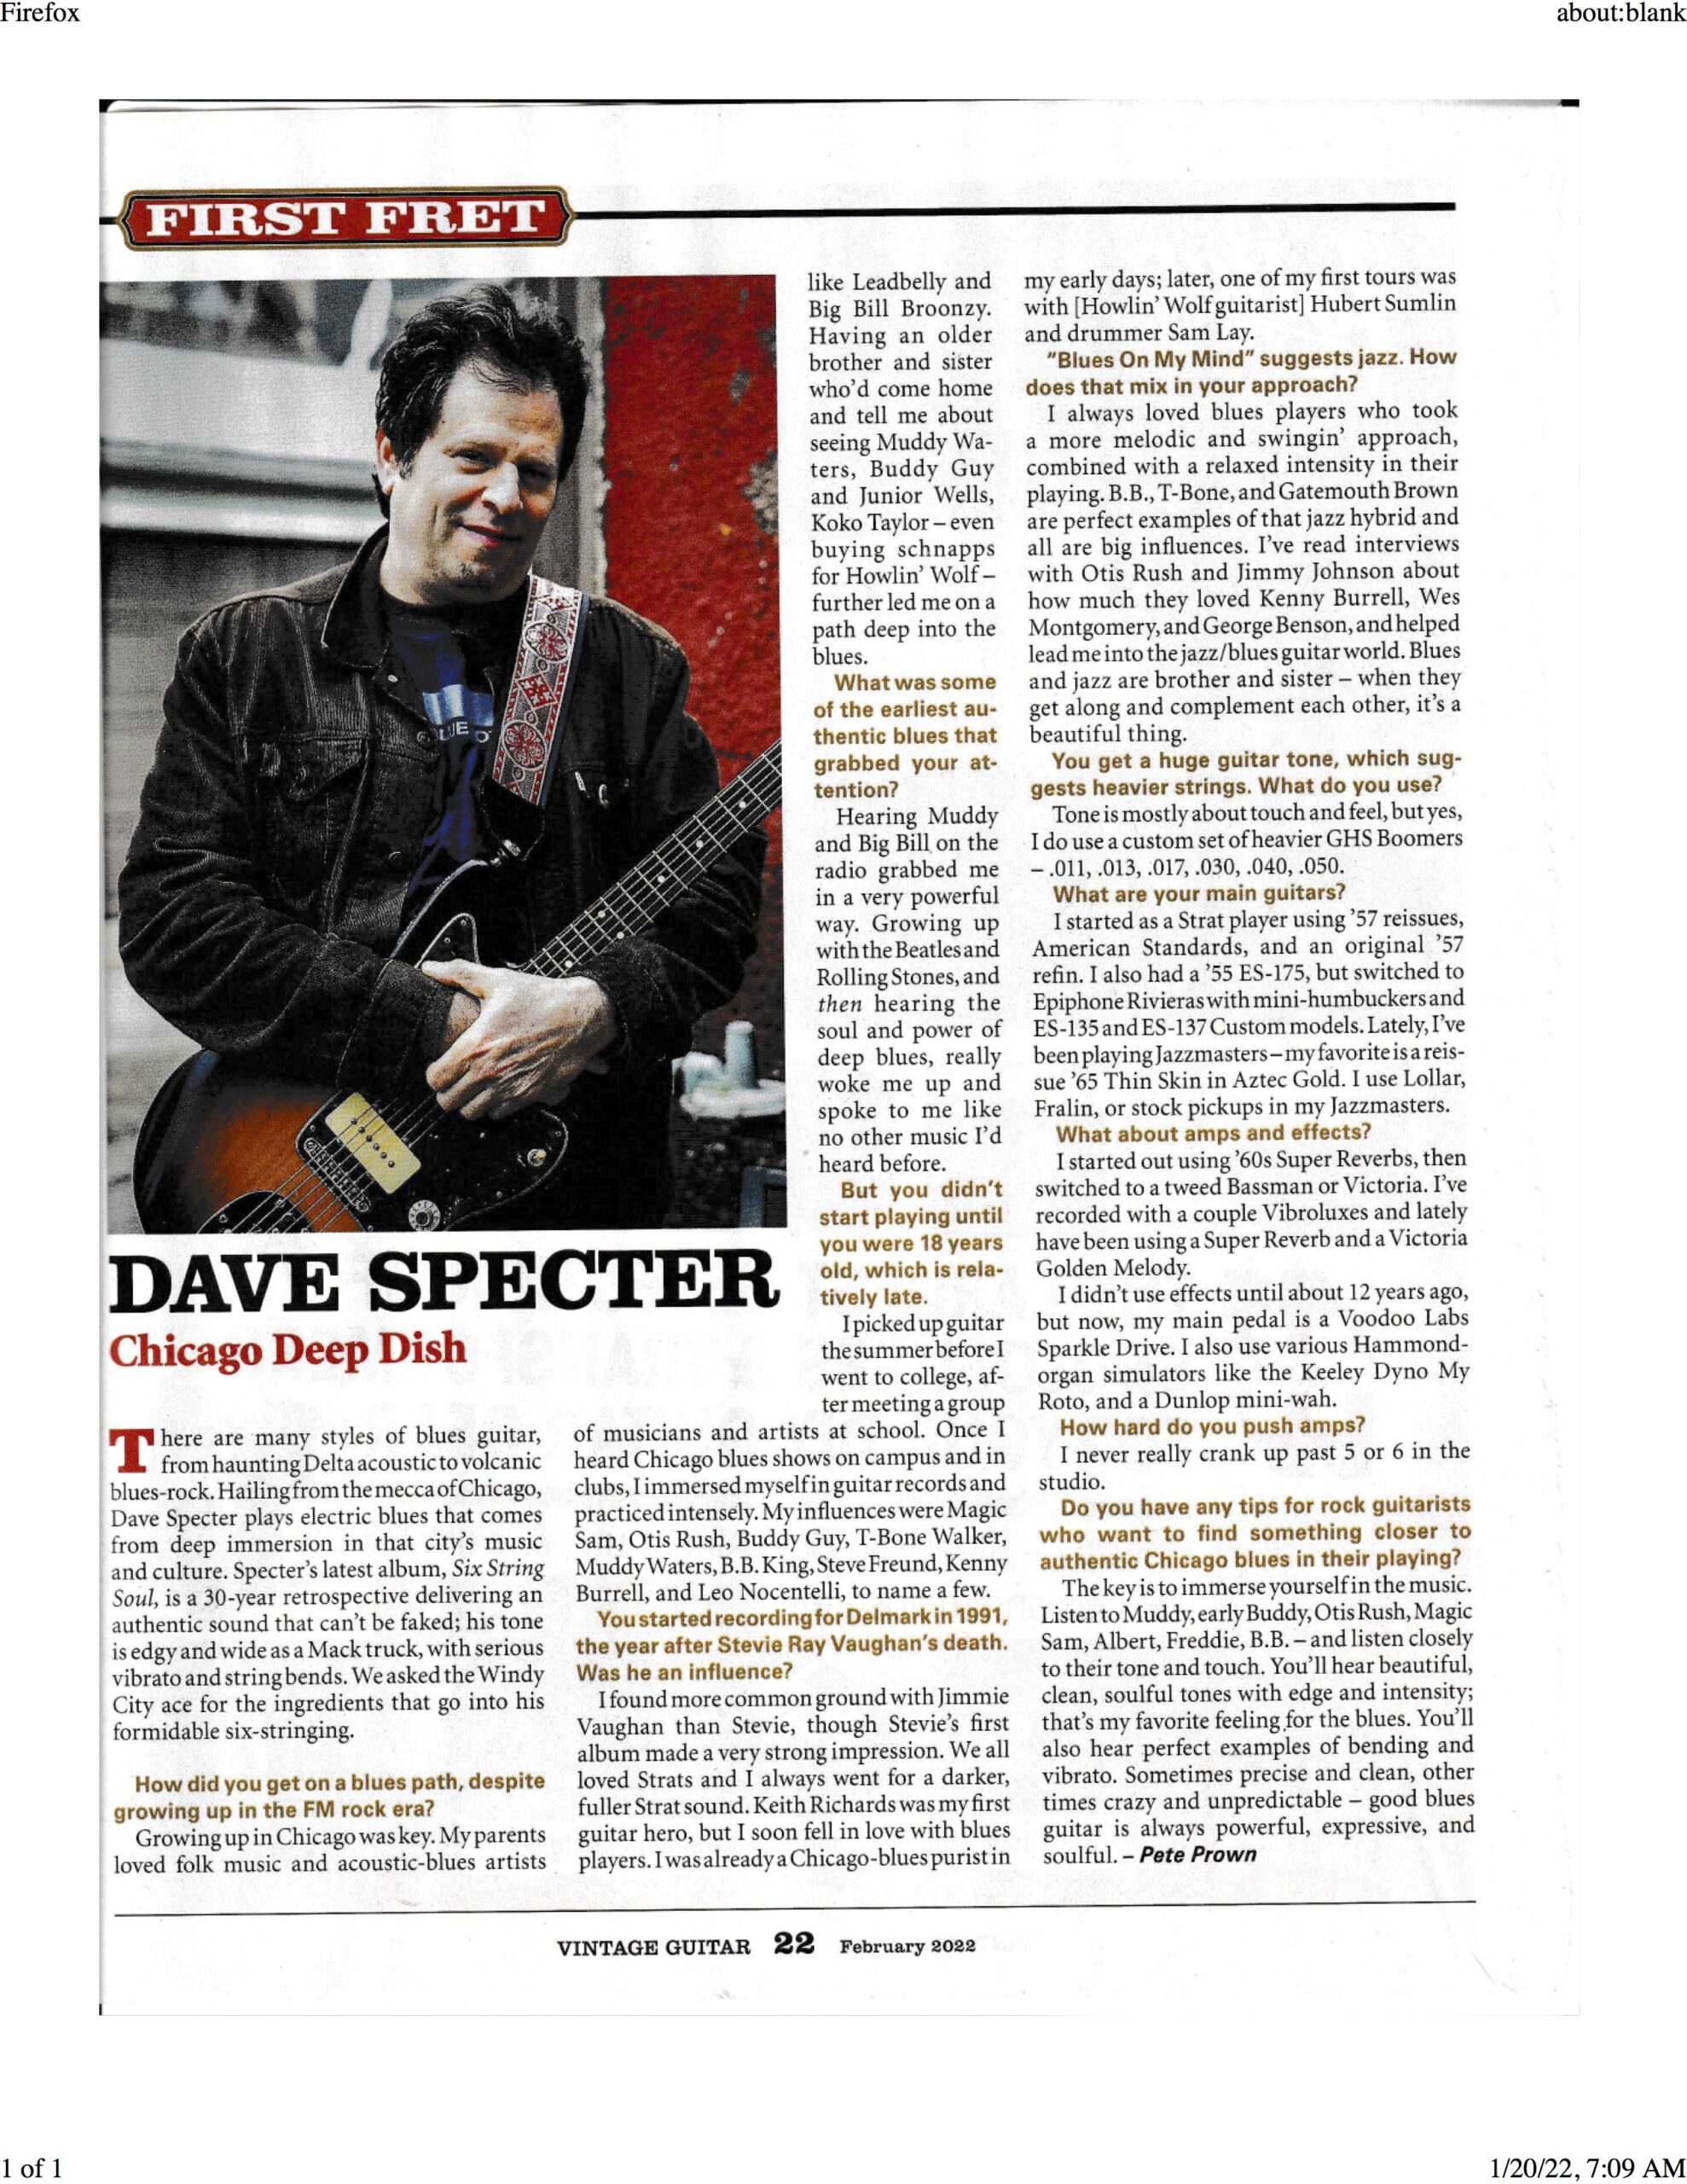 Dave Specter's “Six String Soul” Gets Rave Reviews & Extensive